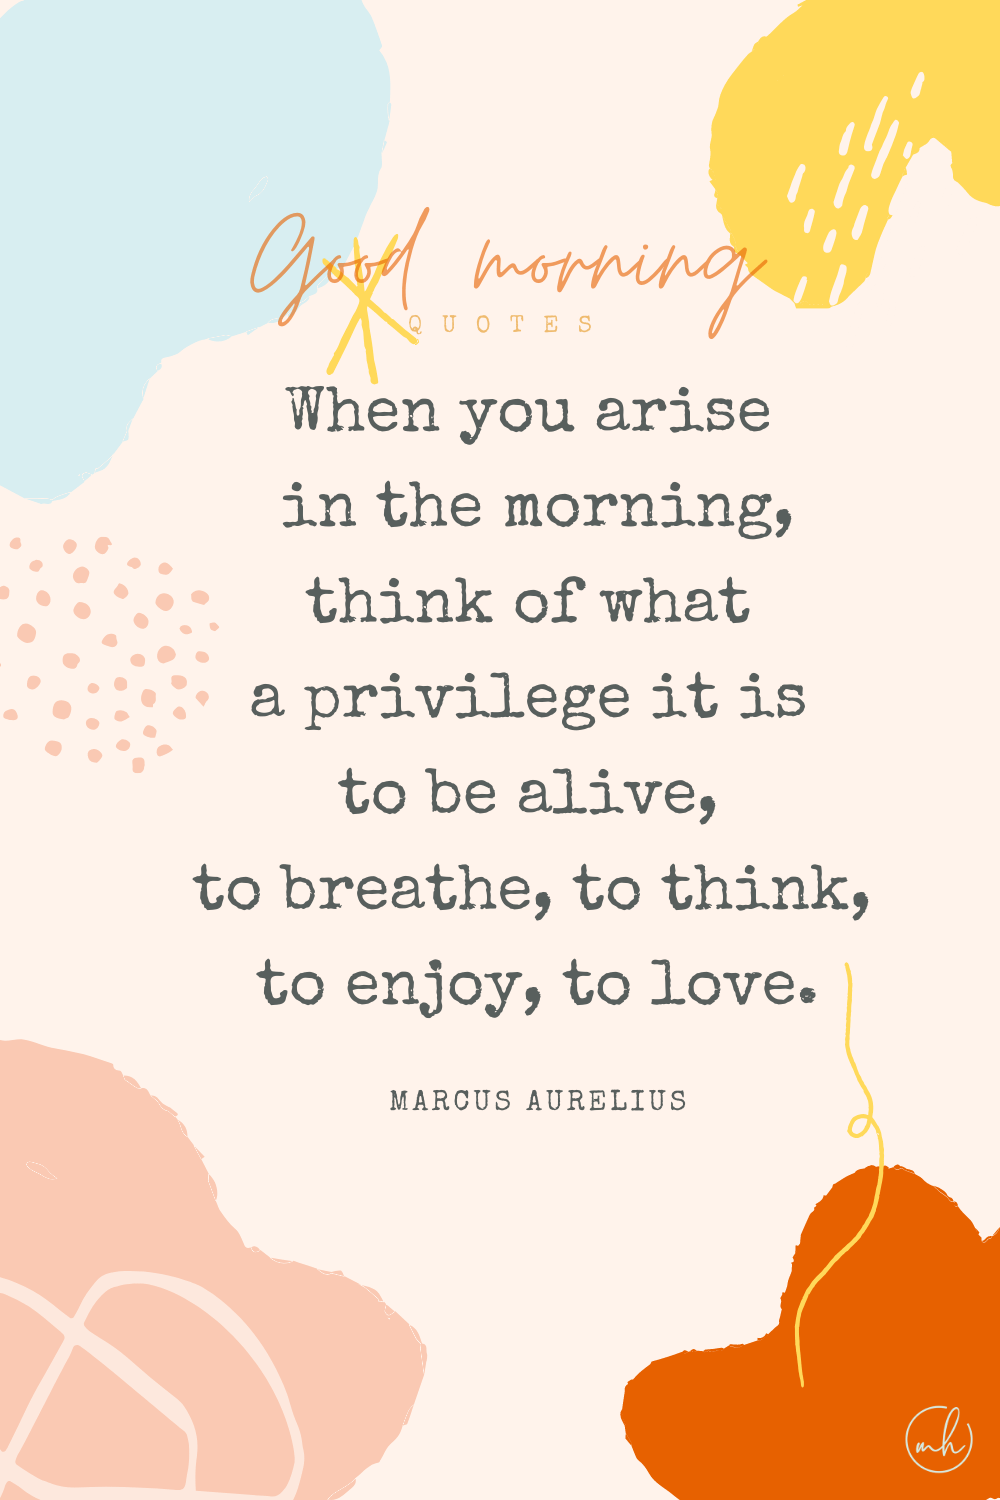 "When you arise in the morning, think of what a precious privilege it is to be alive, to breathe, to think, to enjoy, to love." – Marcus Aurelius